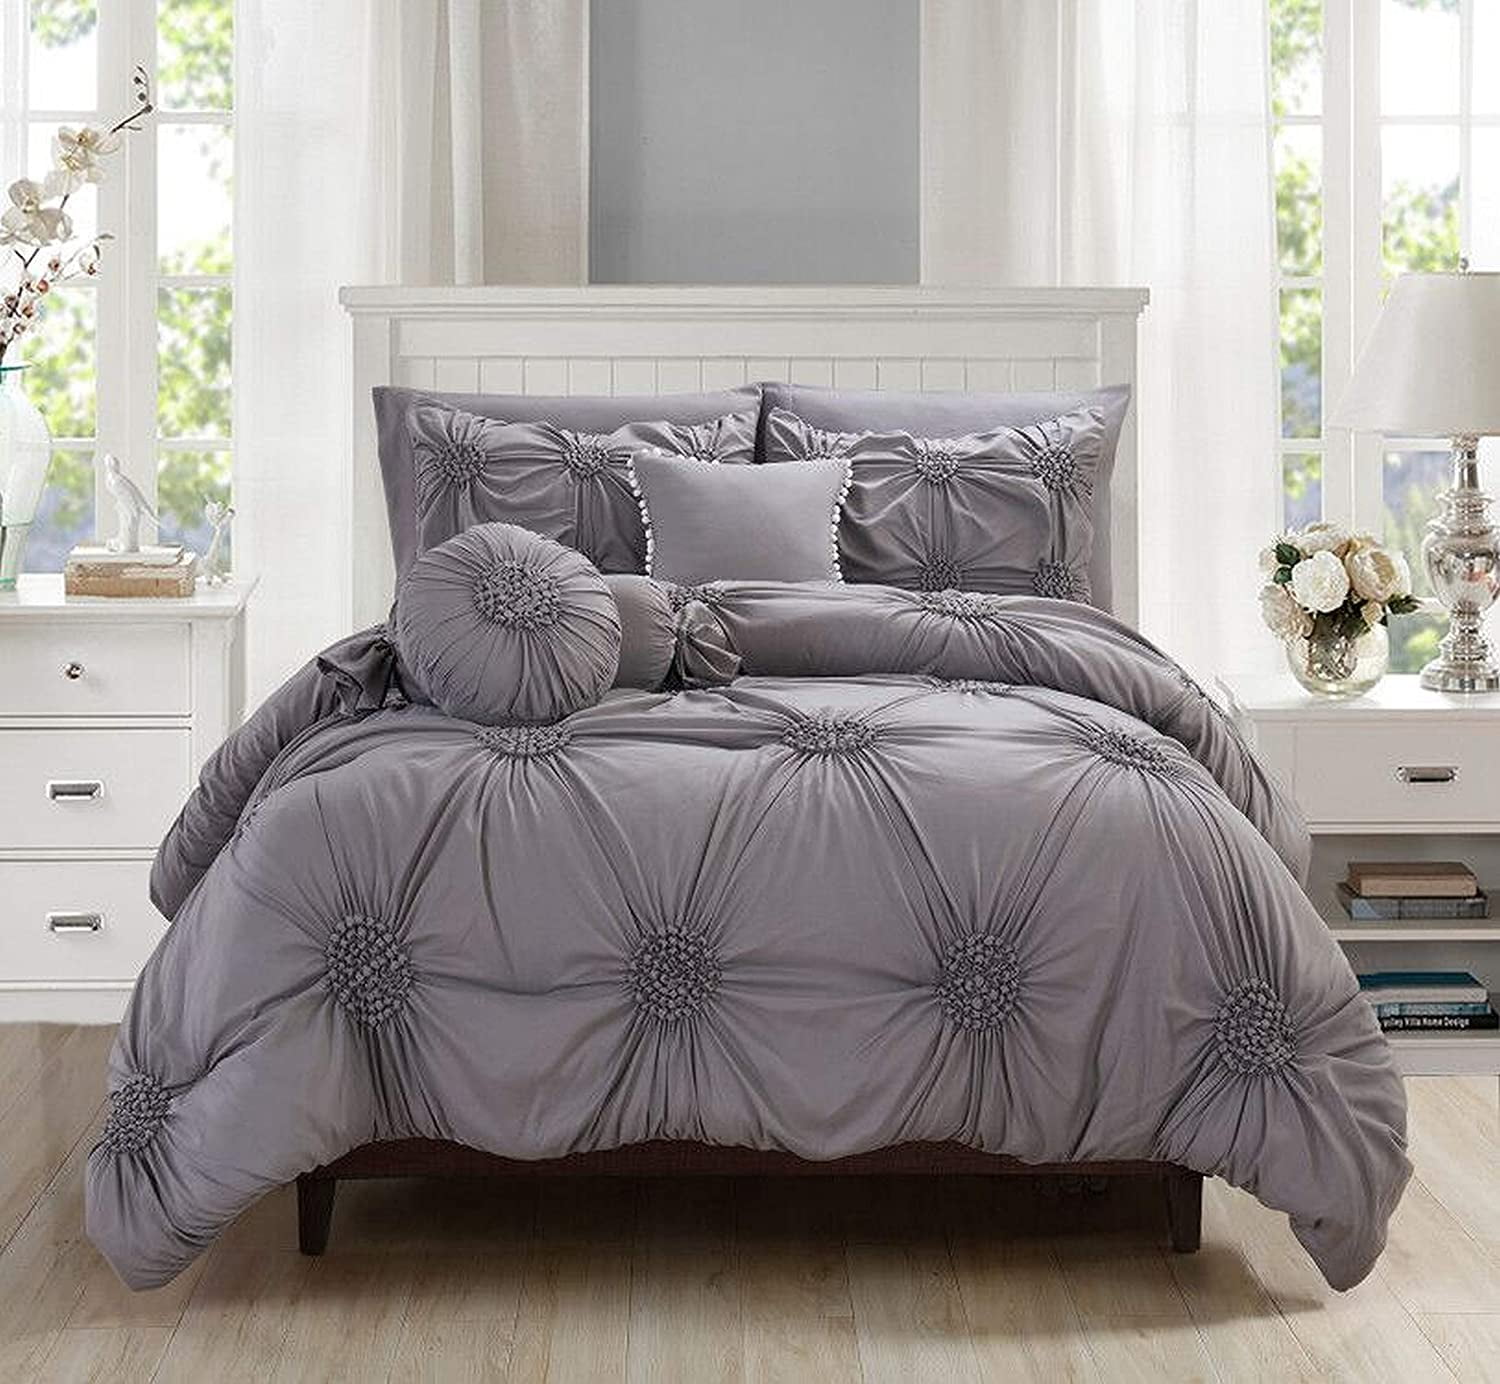 Maple&Stone Gray Comforter Sets for Queen Bed - Grey Bedding Sets Queen,  Bed Set 7 Pieces with Sheet, All Season Grey Bed in a Bag 88x88 inches